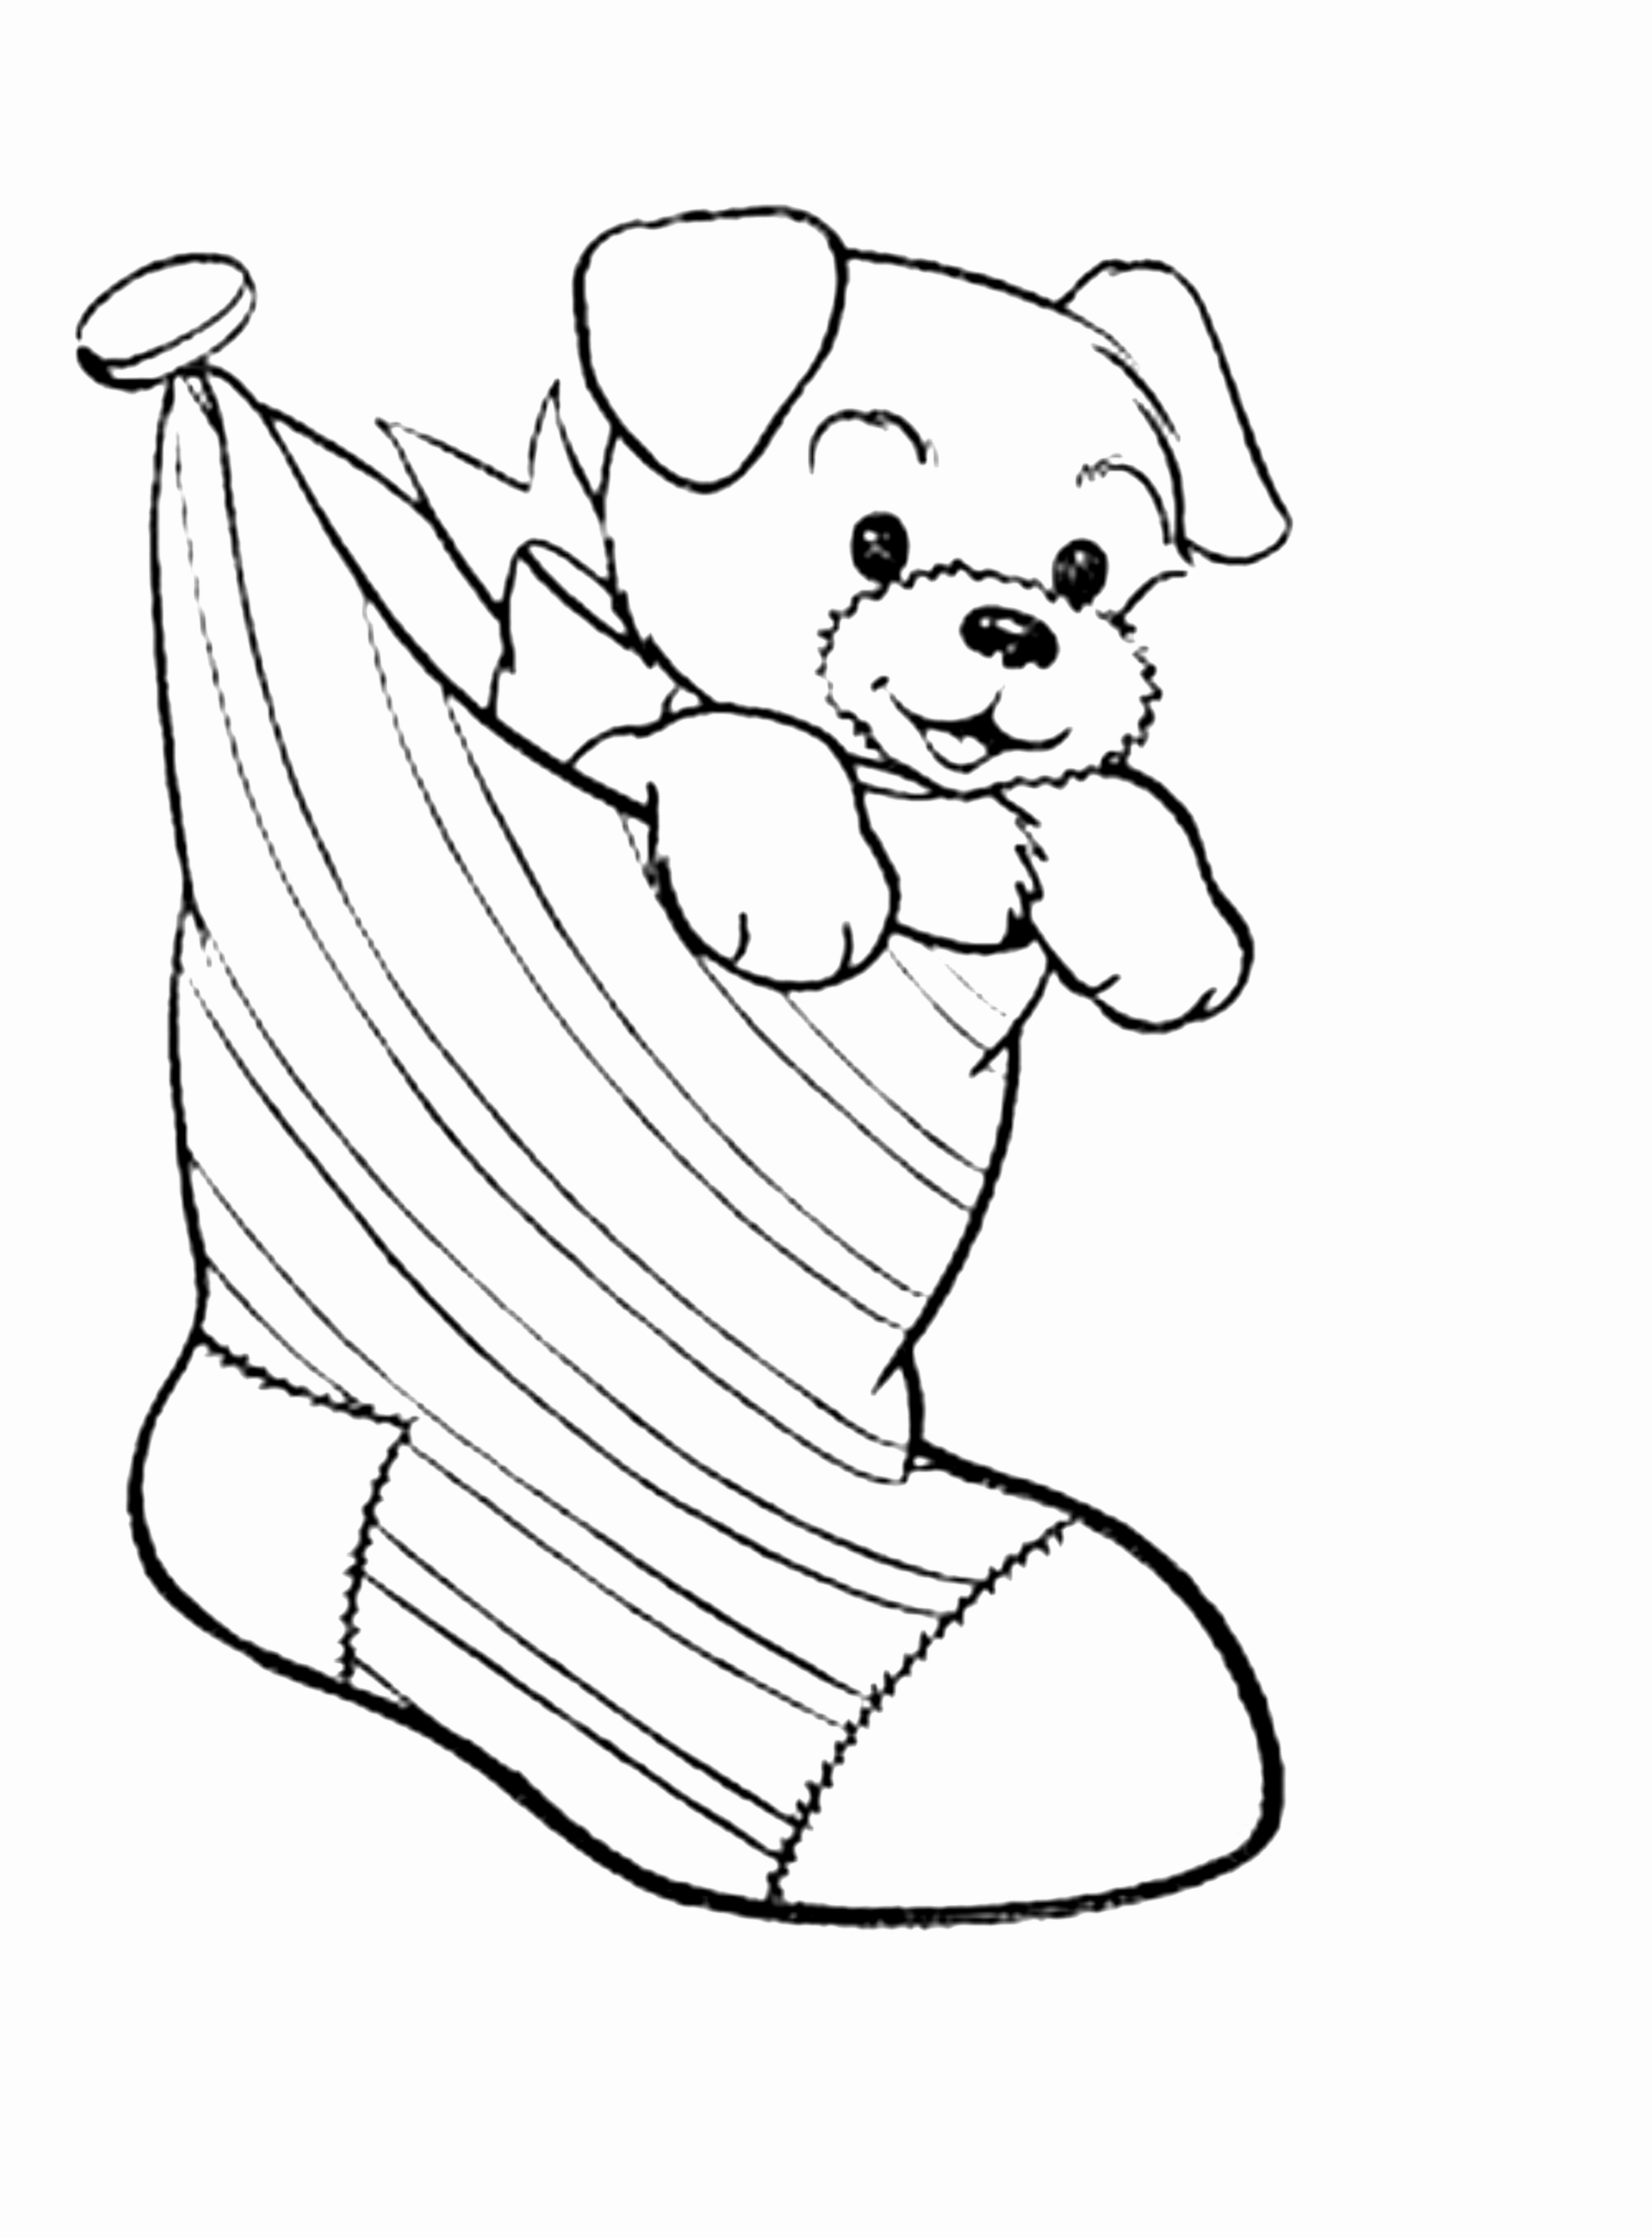 Pomeranian Puppy Coloring Pages at GetColorings.com | Free printable ...